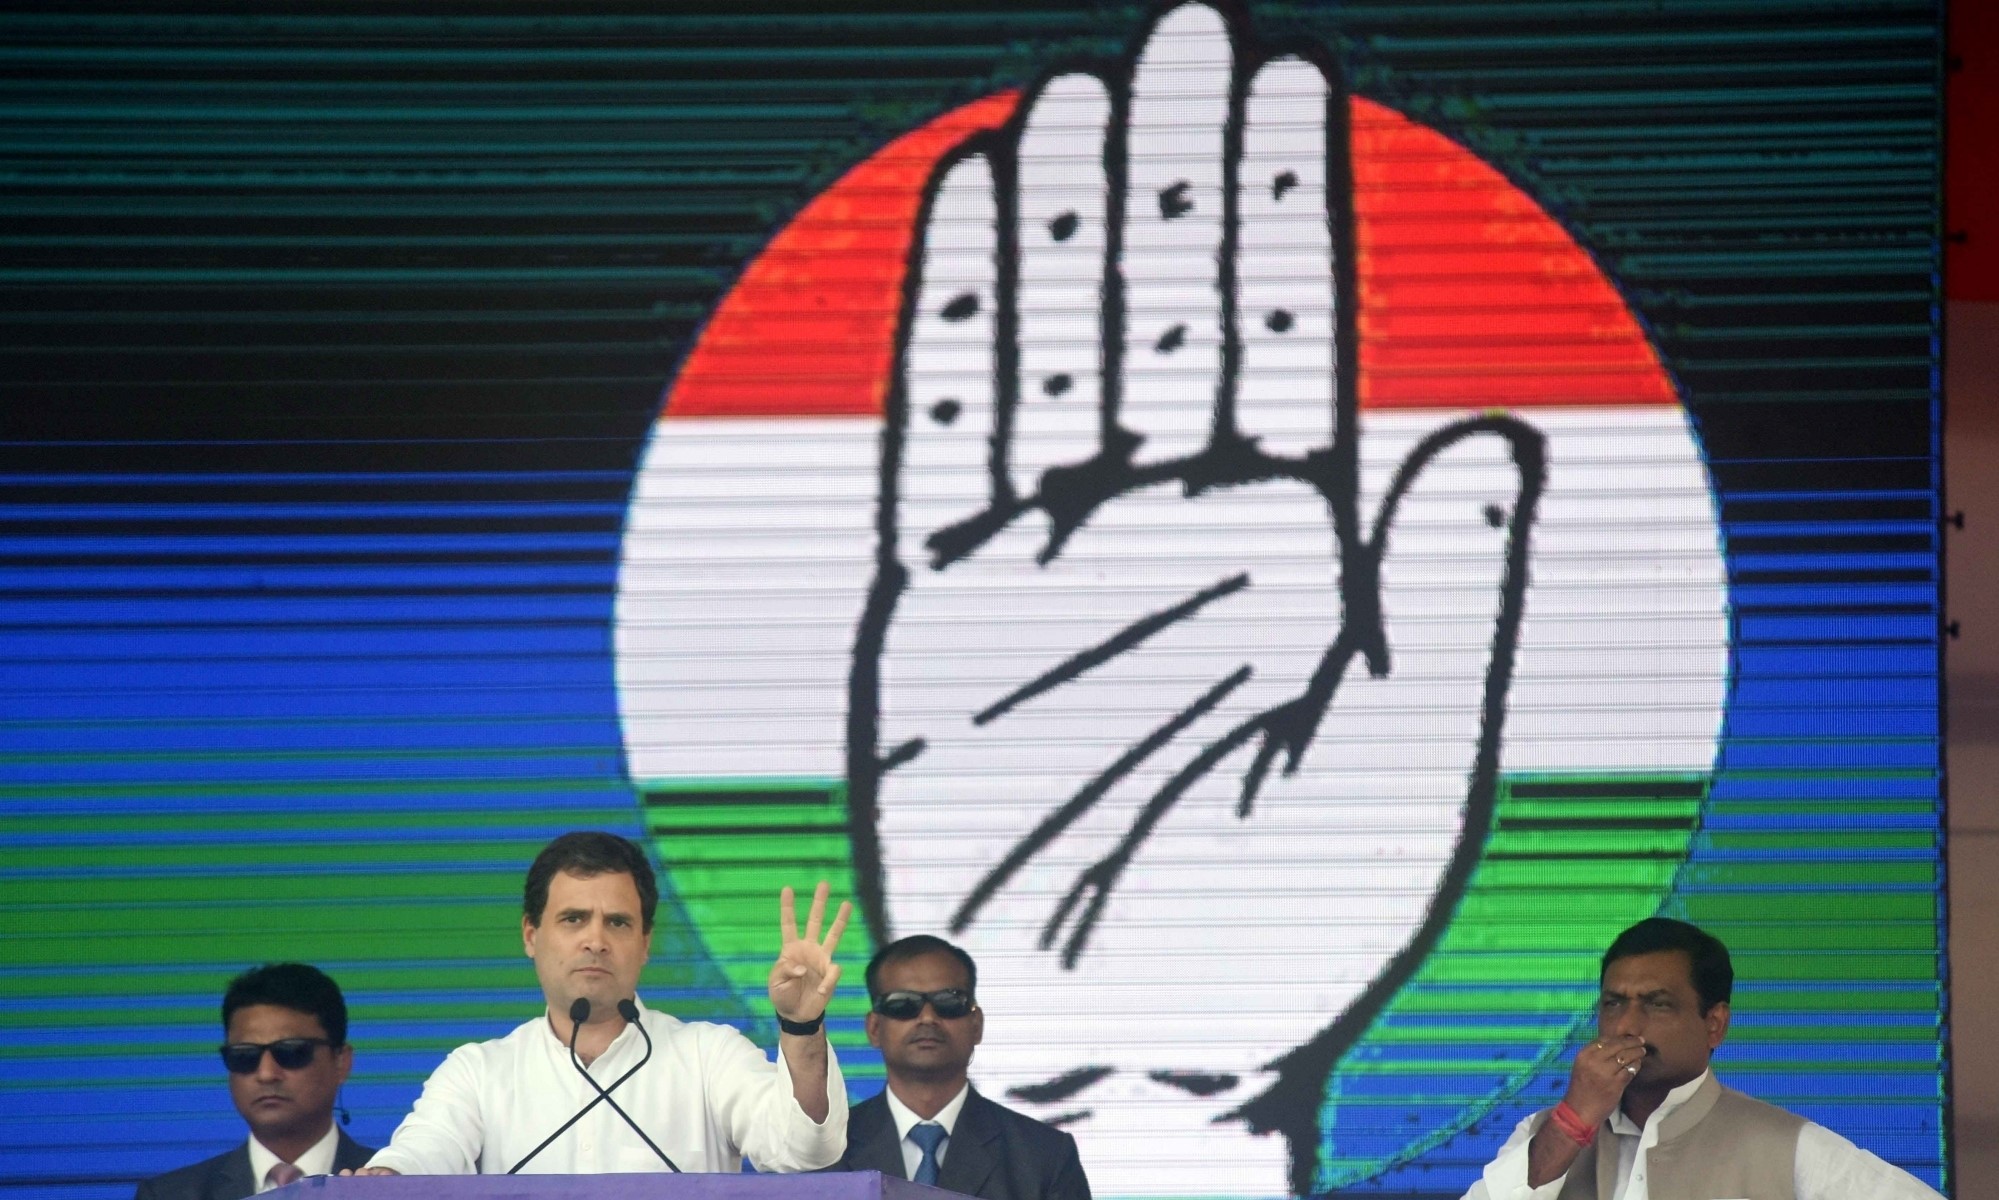 Rahul Gandhi promises to facilitate education loans if voted to power